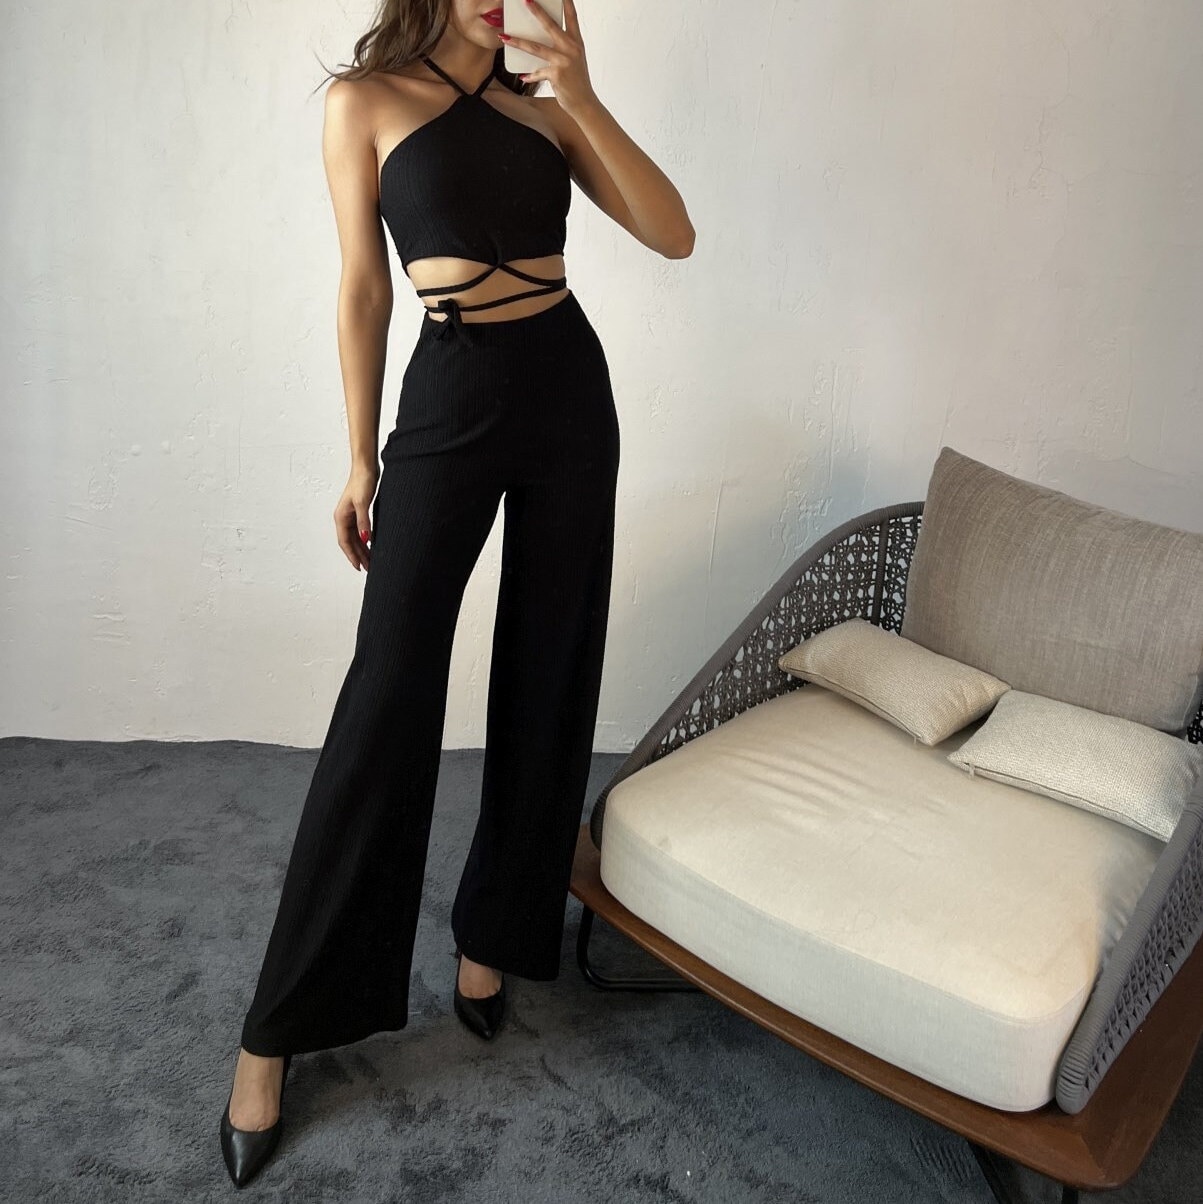 Women Crop Top and Pant SUIT, Sexy Suit, Black Crop Tops, Black Women  Pants, Black Women Suit, Women Summer Tops, Women Casual Suits 